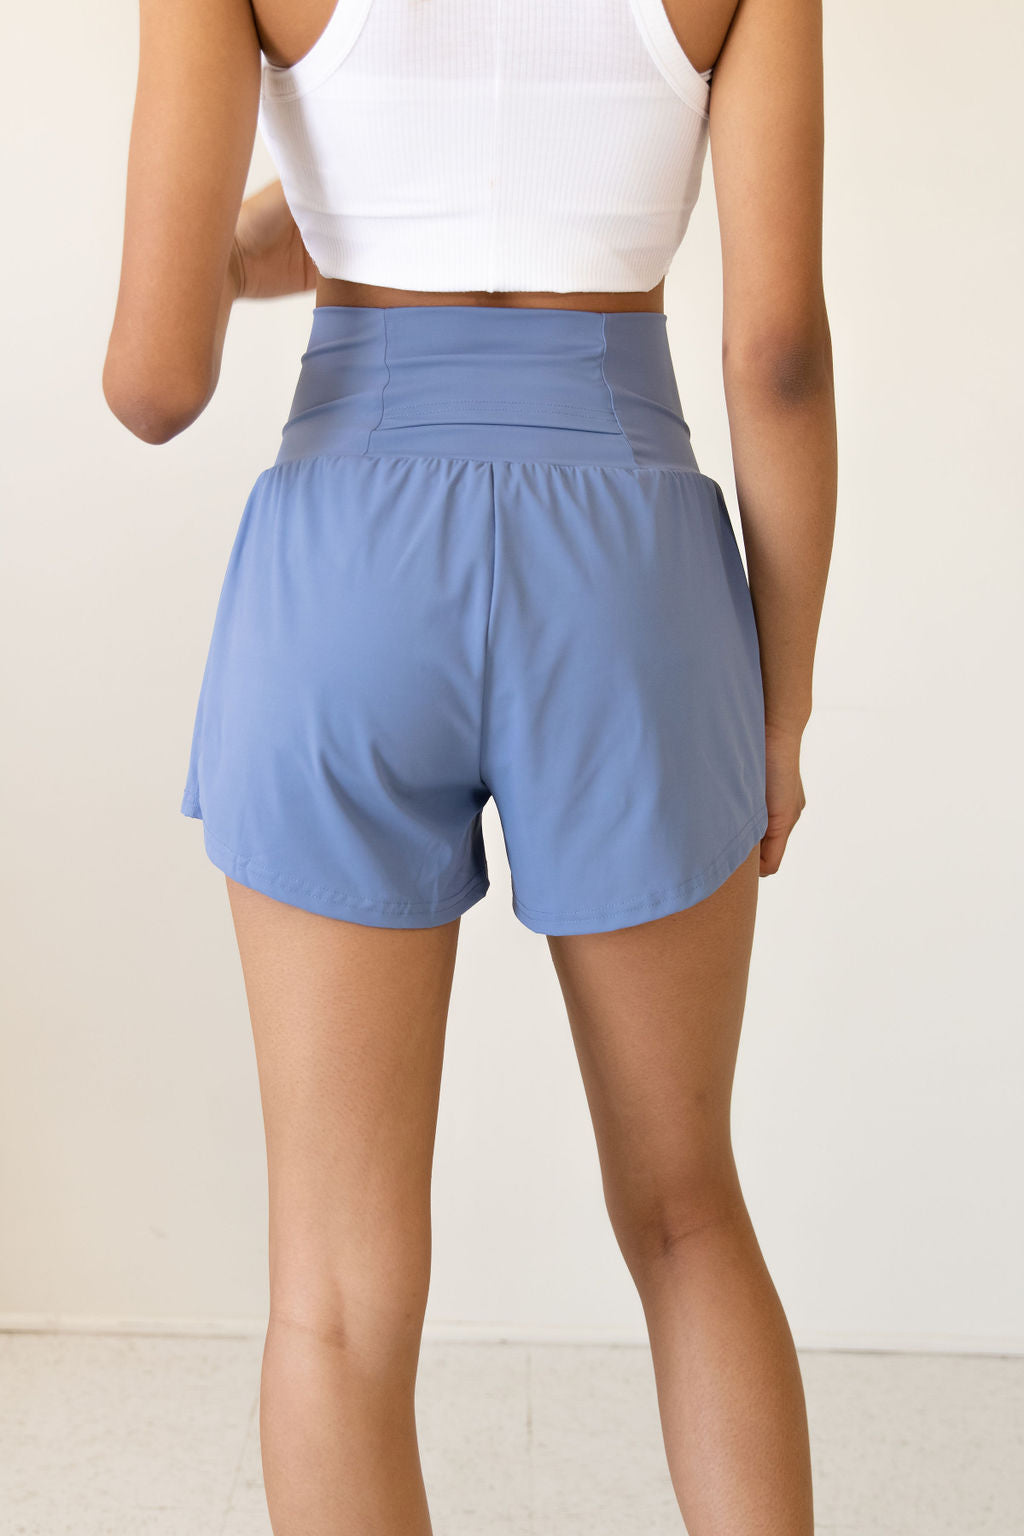 Lucky Girl Activewear Shorts by For Good